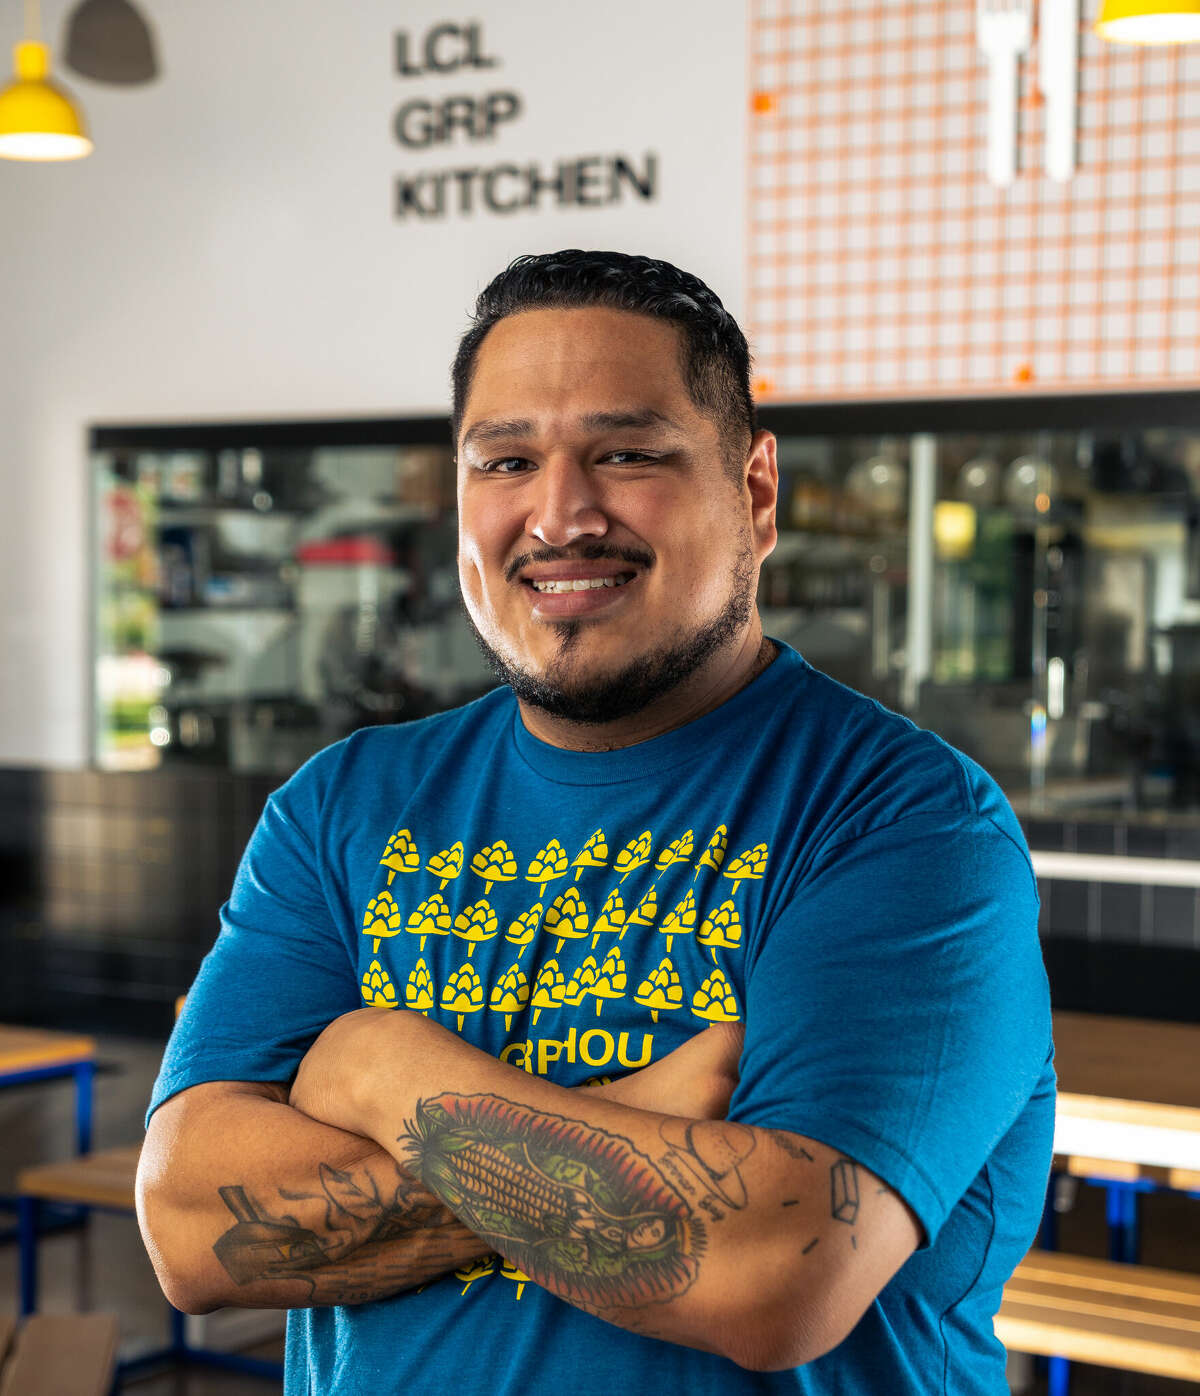 Chef Daniel Leal is taking over the food program at Local Group Brewing, which will soon be renamed.